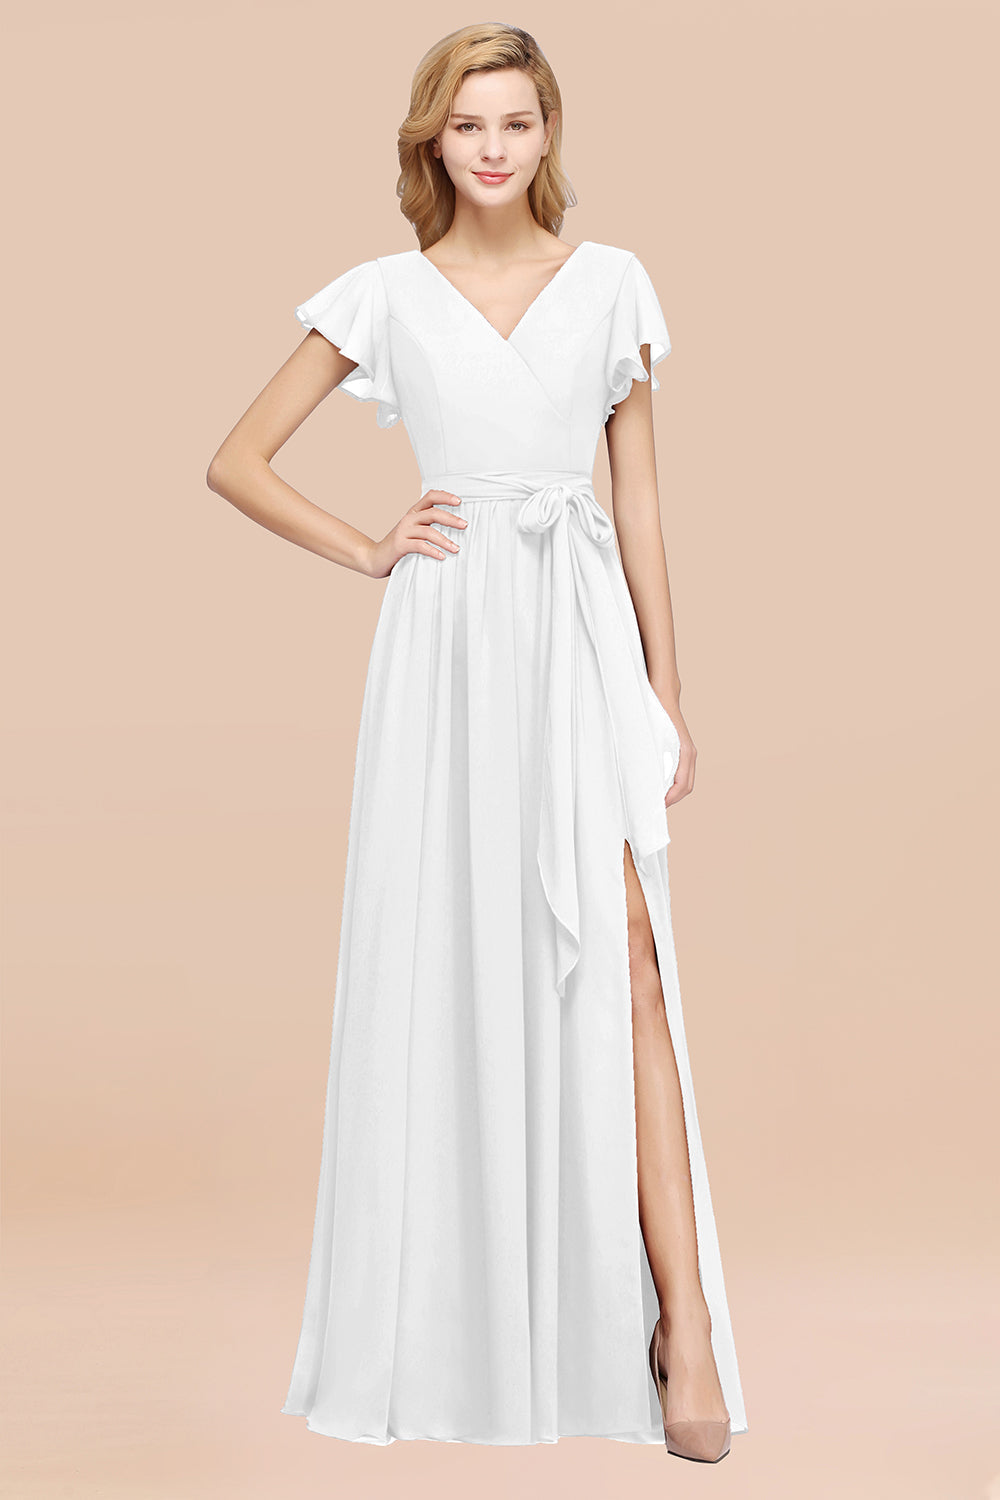 Load image into Gallery viewer, Elegant A-line Chiffon V-Neck Bow Sash Long Bridesmaid Dresses with Slit-BIZTUNNEL
